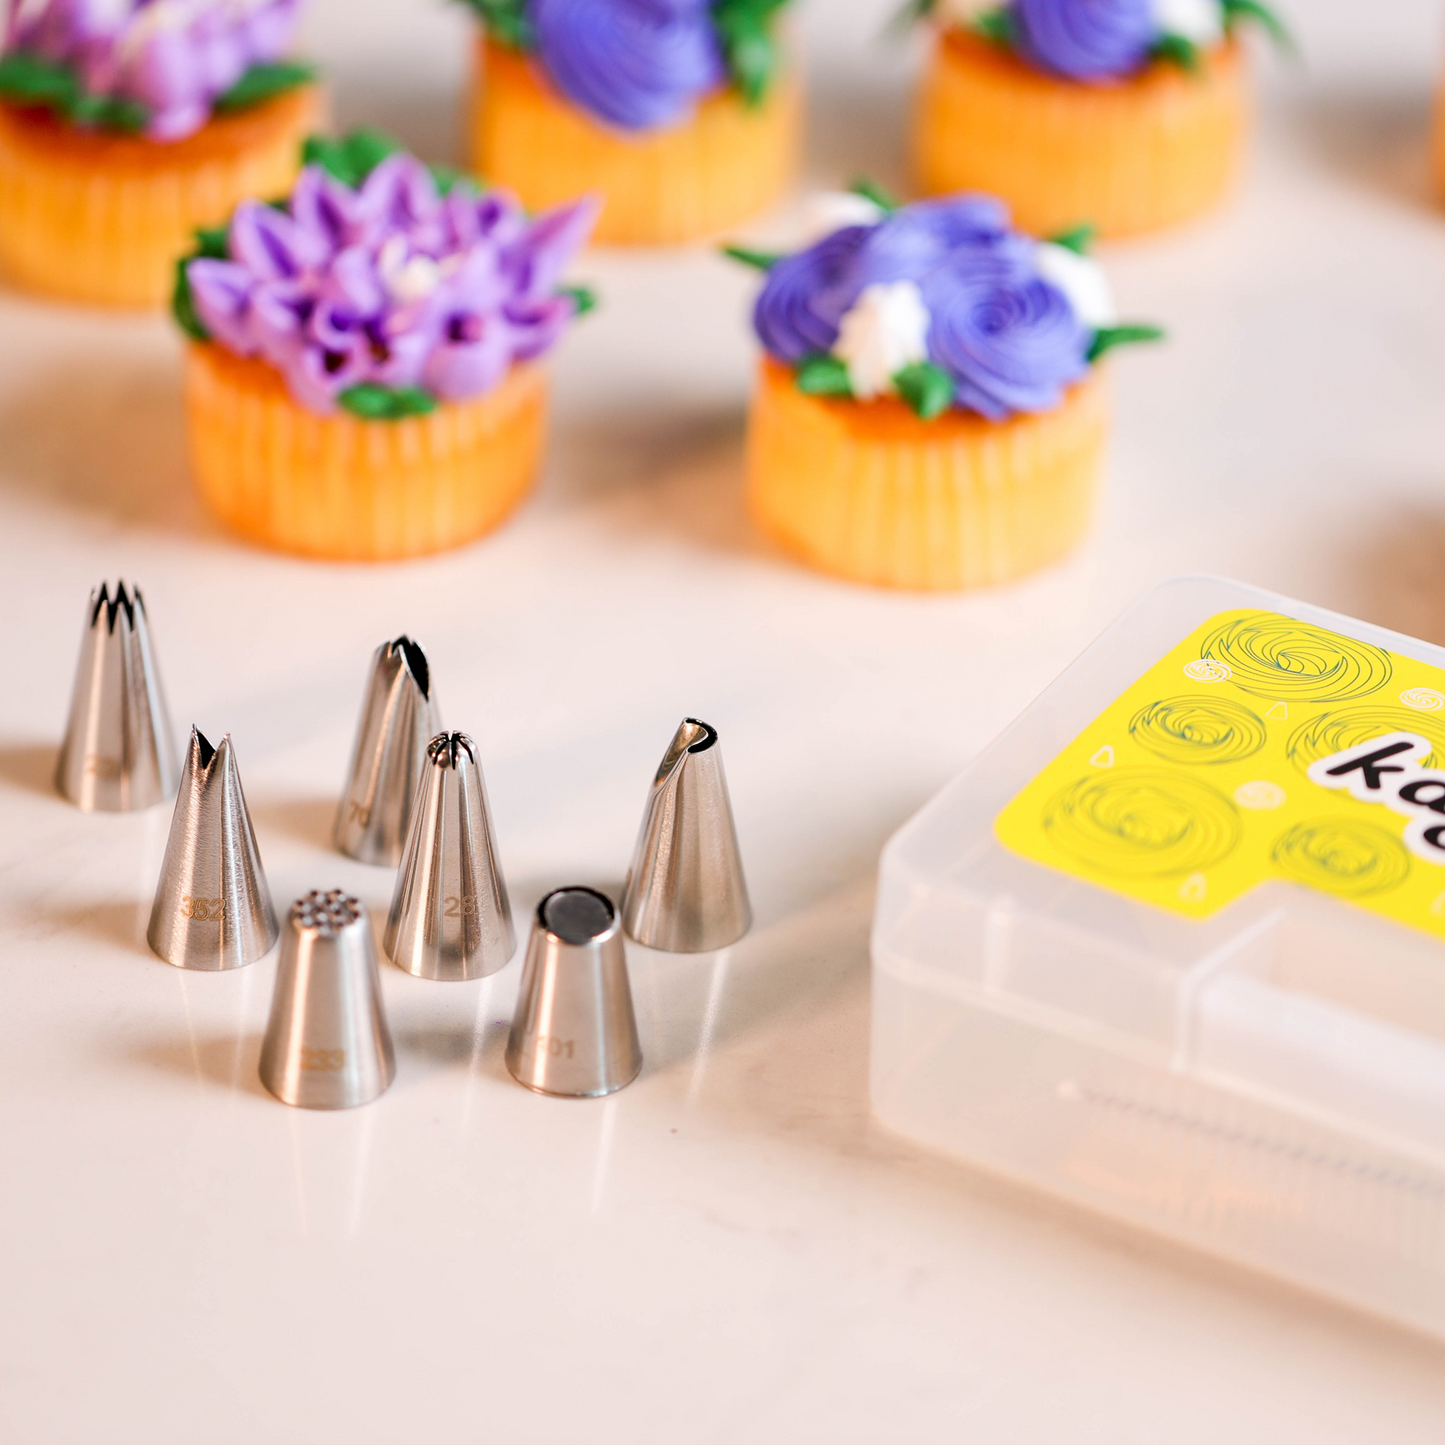 Kayaso Stainless Steel 24-Piece Decorating Icing Tip Set Includes 20 pcs Piping Bags with Couplers